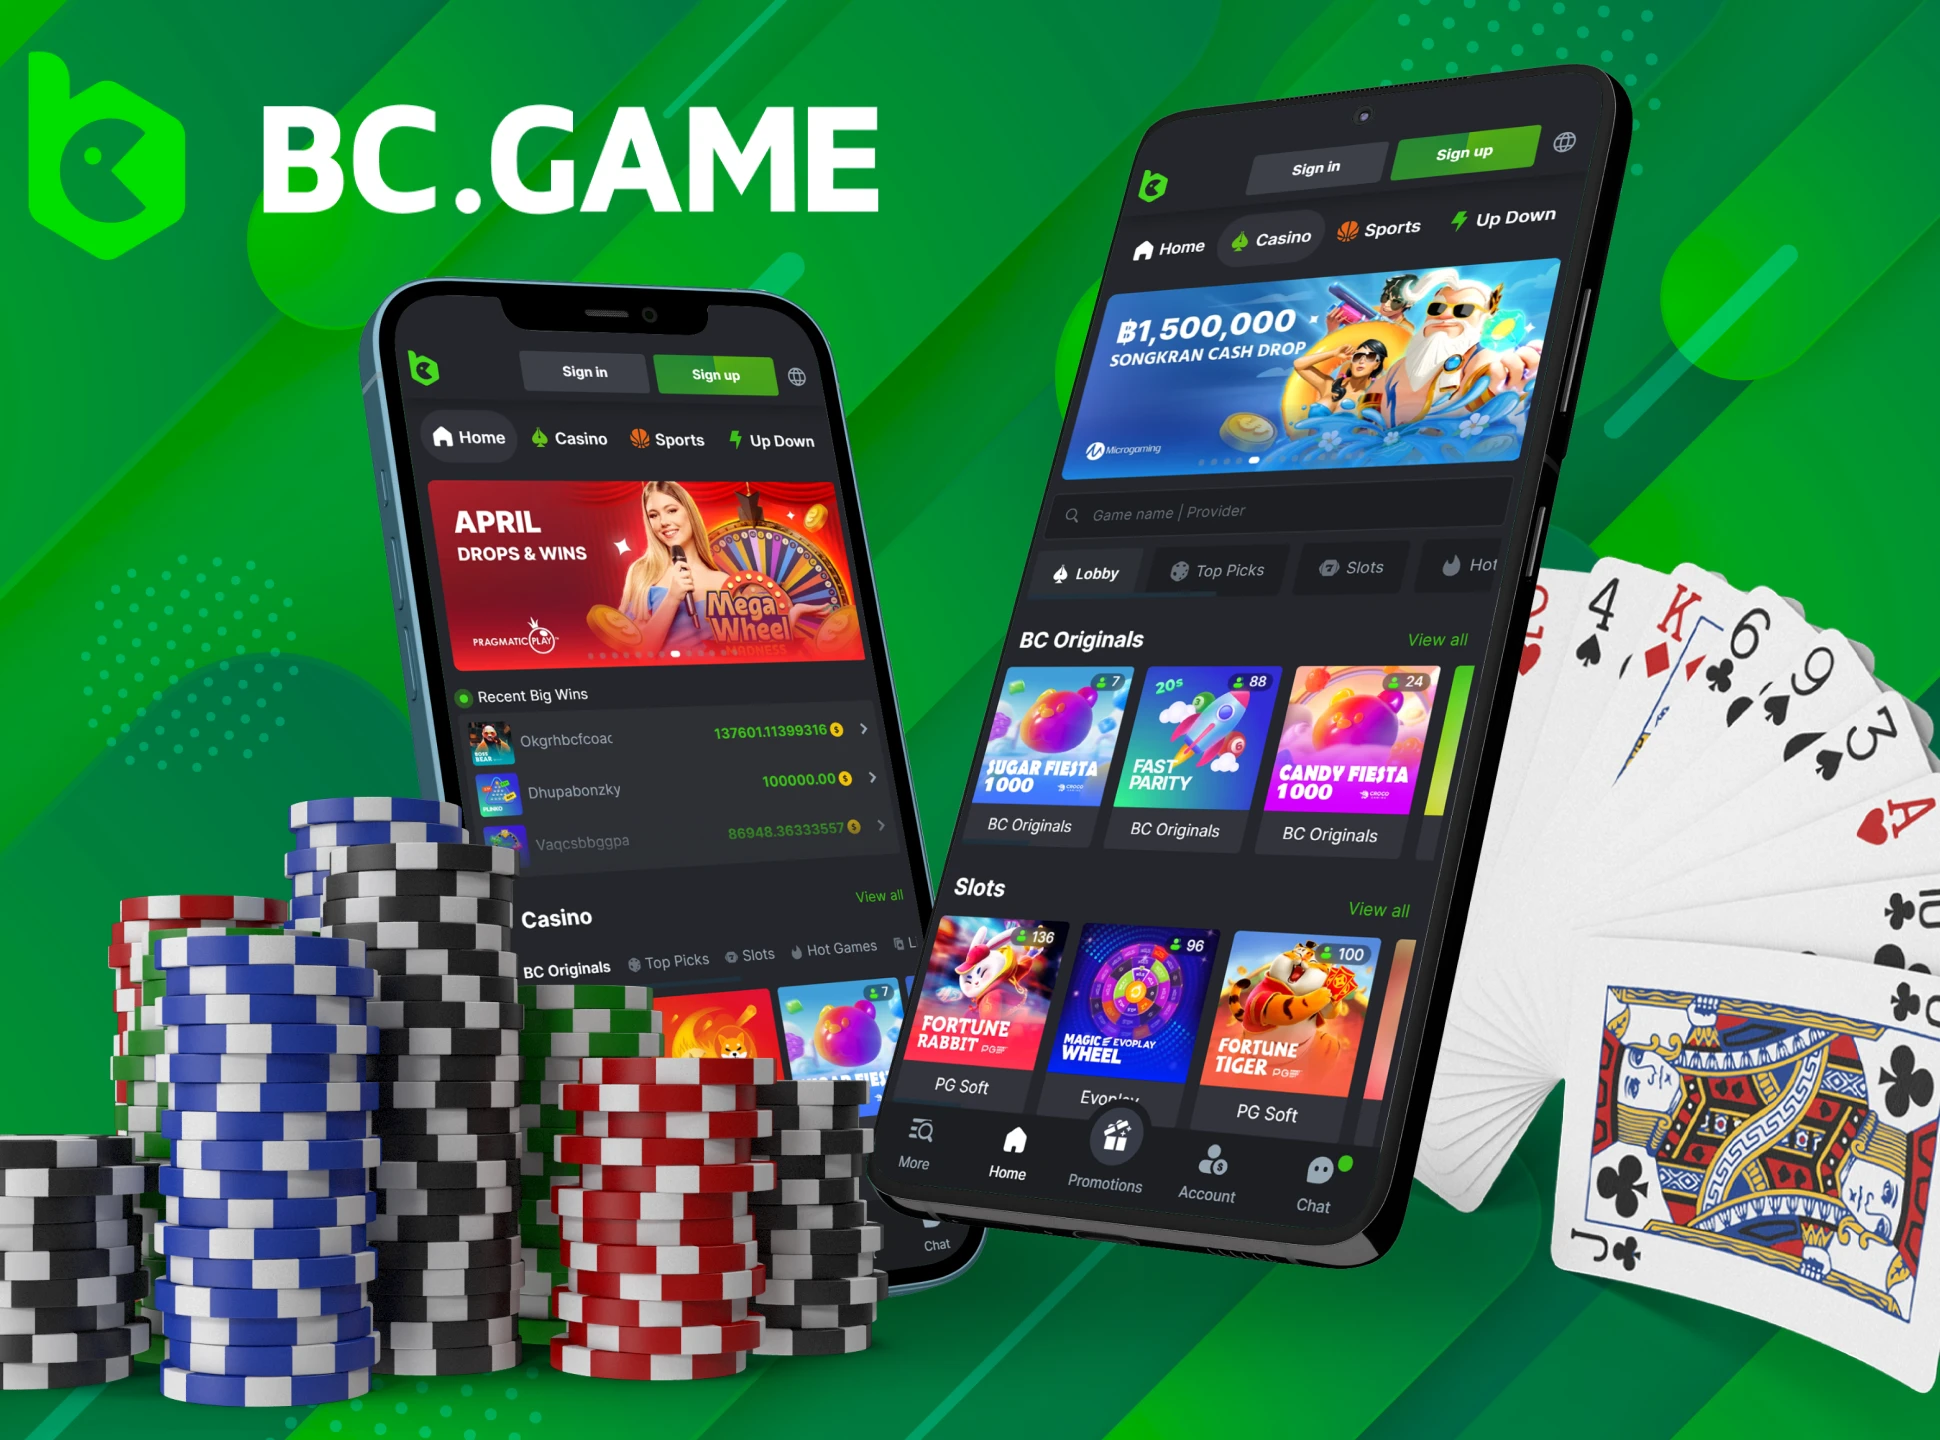 In the BC Game app you will find a variety of casino games and sporting events to bet on.